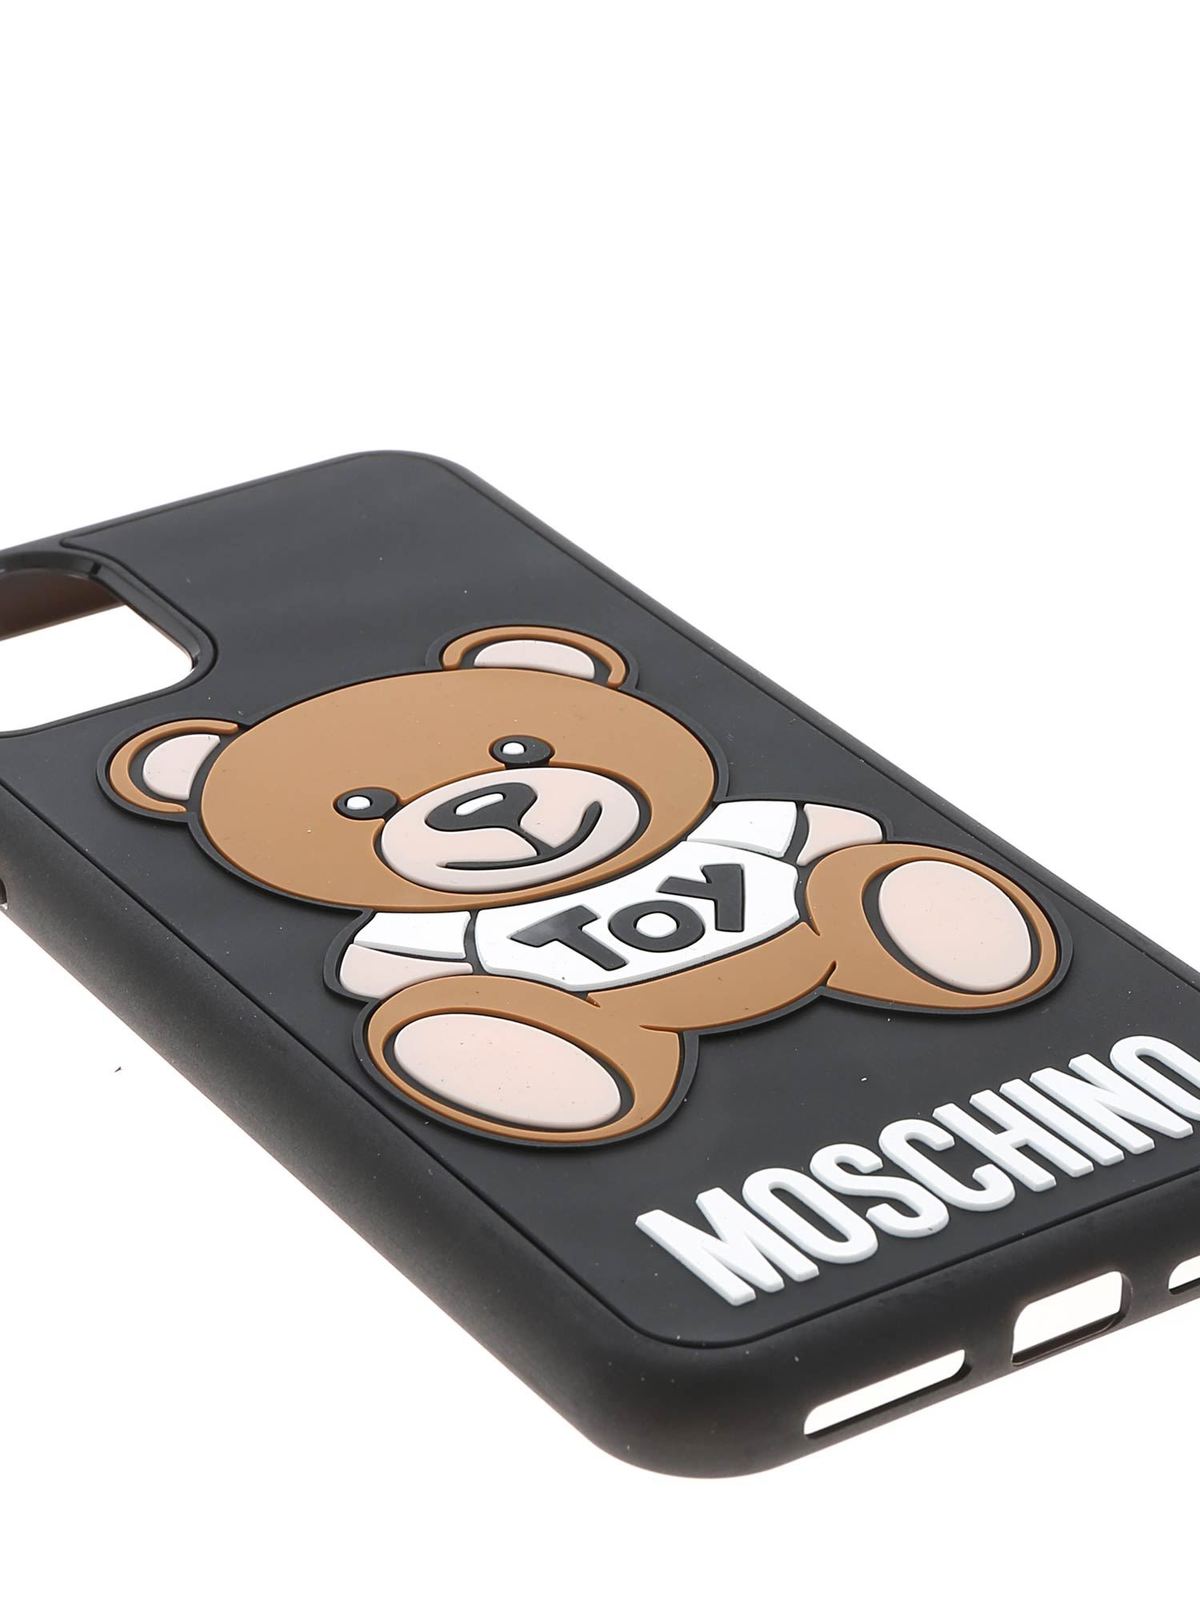 Womens Accessories Phone cases Save 62% Moschino Iphone 11 Pro Max Cover Unisex in Black 